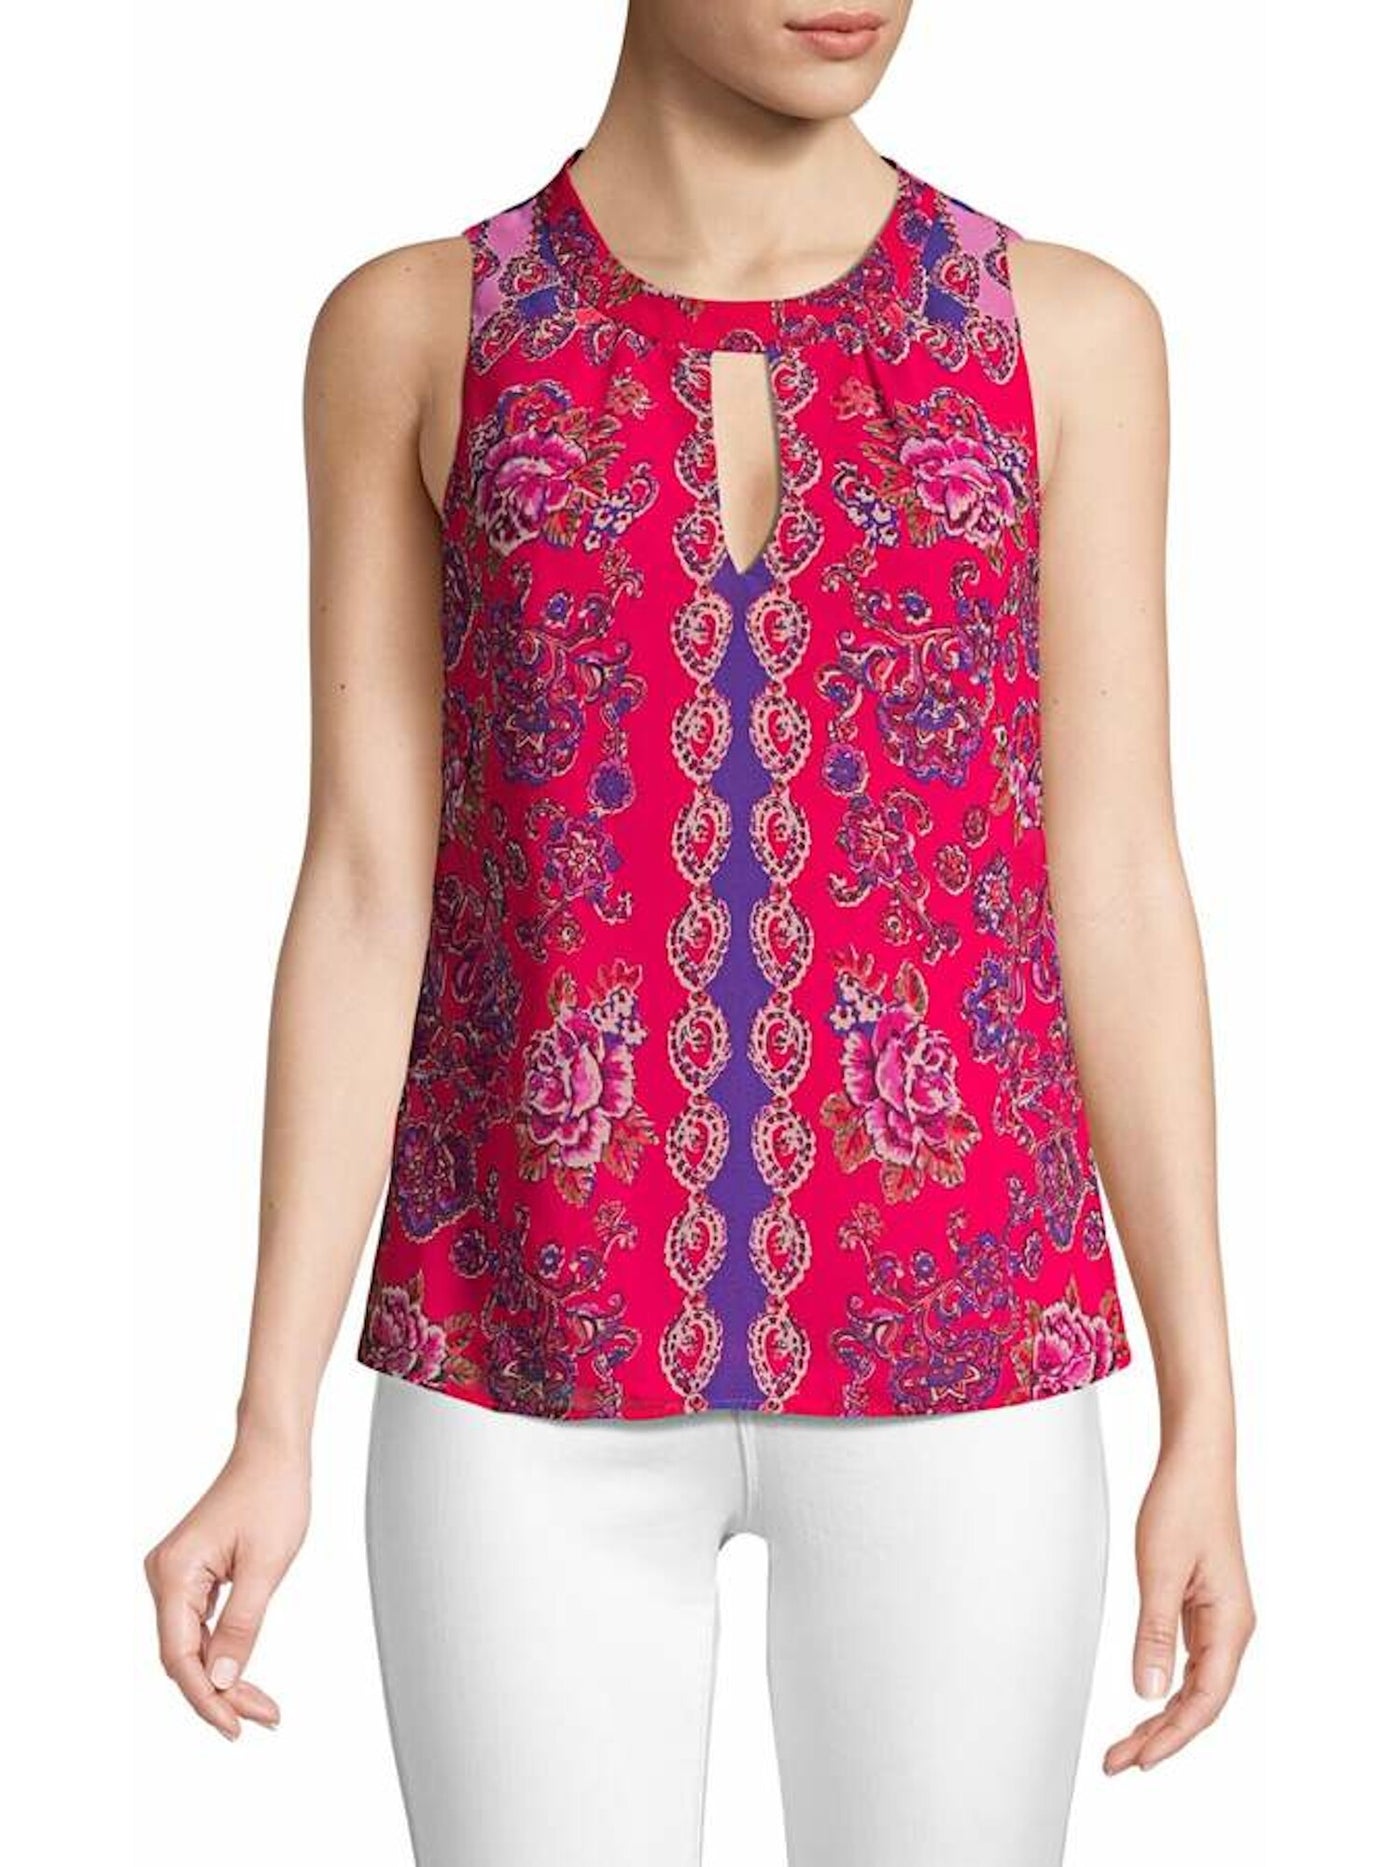 NANETTE LEPORE Womens Red Printed Sleeveless Keyhole Top M